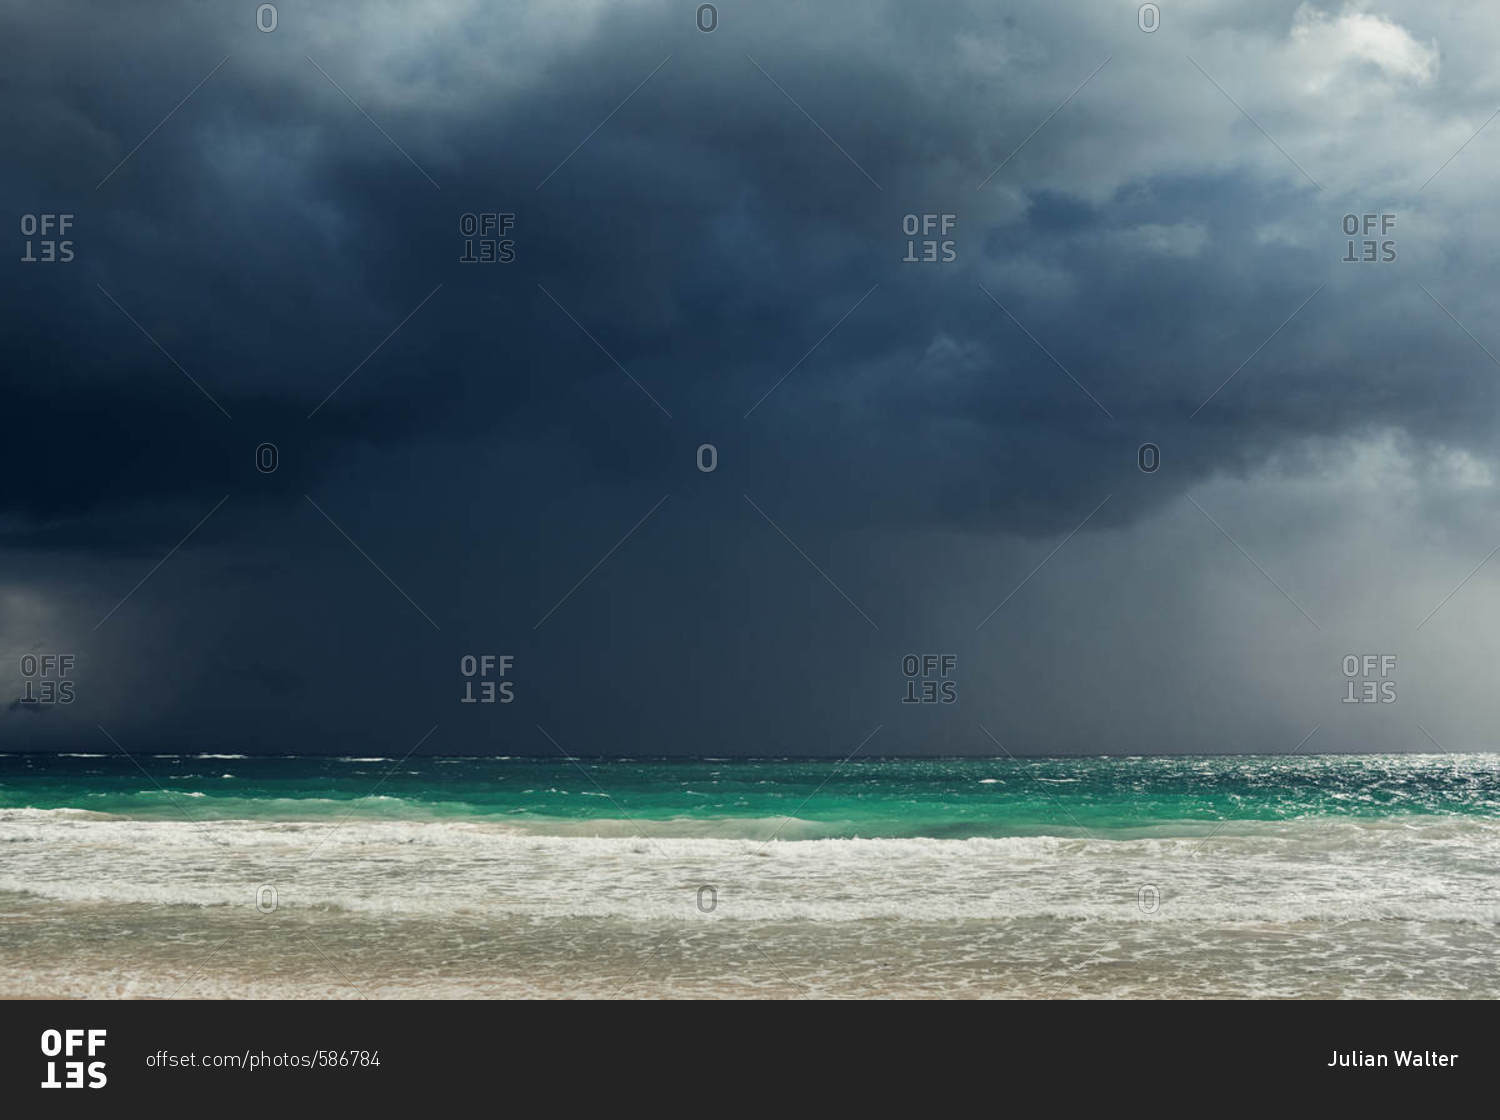 Turquoise water under stormy sky on the coast of Tulum, Quintana Roo, Mexico